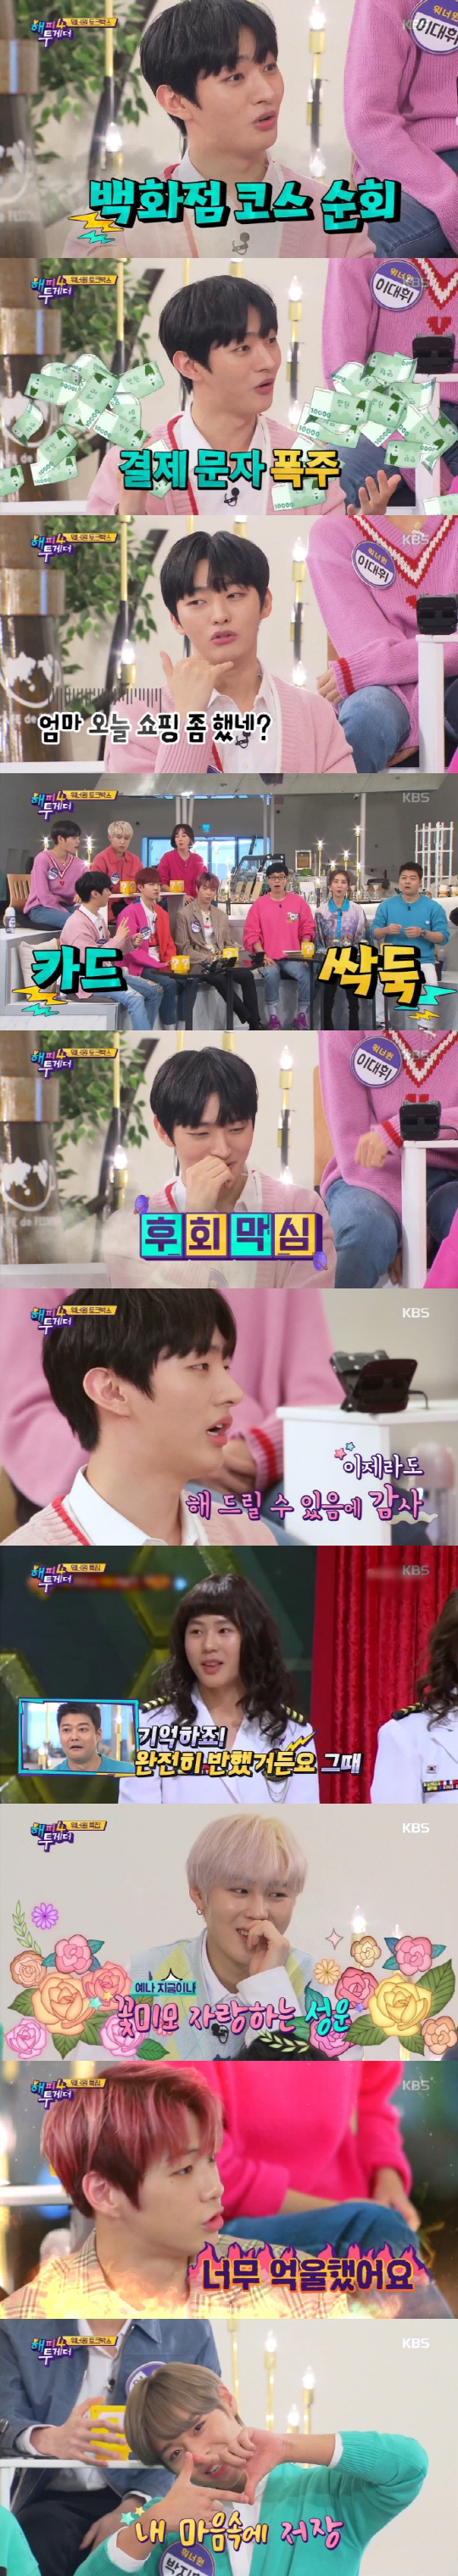 Group Wanna One showed a unique sense of entertainment and warmed up the room on Thursday night.In KBS2 Happy Together broadcasted on the afternoon of the 15th, Wanna One Special House, which was broadcast by Wanna One, was broadcast.On this day, Wanna One made the audience catch up with the Horny Family by demonstrating the hidden charm and the ability to talk to the parents after the first settlement.Kang Daniel, who said, I am new to the first airwave entertainment that Wanna One complete appeared before debut, said Kang Daniel, who recently became greedy for broadcasting. I sent it to the artist every time I thought of Episode.Kang Daniel, who also sang Misunderstood as Kang Daniels girlfriend, attracted attention by unveiling the deadly Model, Back View, the starting point of Misunderstood.Kang Daniel said, I was photographed by Model, Back View, who is doing a shoulder to Ha Sung-woon, and there was a rumor that Kang Daniel has a woman friend.Ha Sung-woon said, I have been dashed by Jun Hyun-moo before debut. I have been dressed in a program before debut.Jun Hyun-moo said that he was ideal after seeing my Model, Back View. Wanna Ones Happy Together was not just a silky Horny Family catch gag code.After the first settlement, Yoon Ji-sung said, I gave my mother a card and she traveled to a department store.I called because the unexpected amounts came by text, but my mother cut off the card on the spot.However, the next day, my brother called to see if the card would be reissued. I was sorry for my mother on the other hand. I felt that I had not enjoyed raising my child. I am sorry I had to do it now.Now you can write coolly, he said, making him smile warmly.Kang Daniel, who said he had bought a house to his parents earlier, said, I told my parents that I had a house gift last time, but it is still a charter.The house I lived in before was narrow, but now I am proud to move to a large place. It is the birth of Hyojadol, which has been unfavorable to parents who are not themselves after the first settlement.Wanna Ones charm also made Happy Together hot.Park Jihoon said, When I am charming these days, I come to Hyunta. I am 20 years old and I feel that I am an adult.Park Jihoon then released a sexy version of Storage in My Heart, shaking the hearts of my sister fans.The talk of Wanna One, which has been unfolding without any gap in the audio, and the sense of entertainment that has been accumulated in the meantime, have made viewers catch Horny Family.